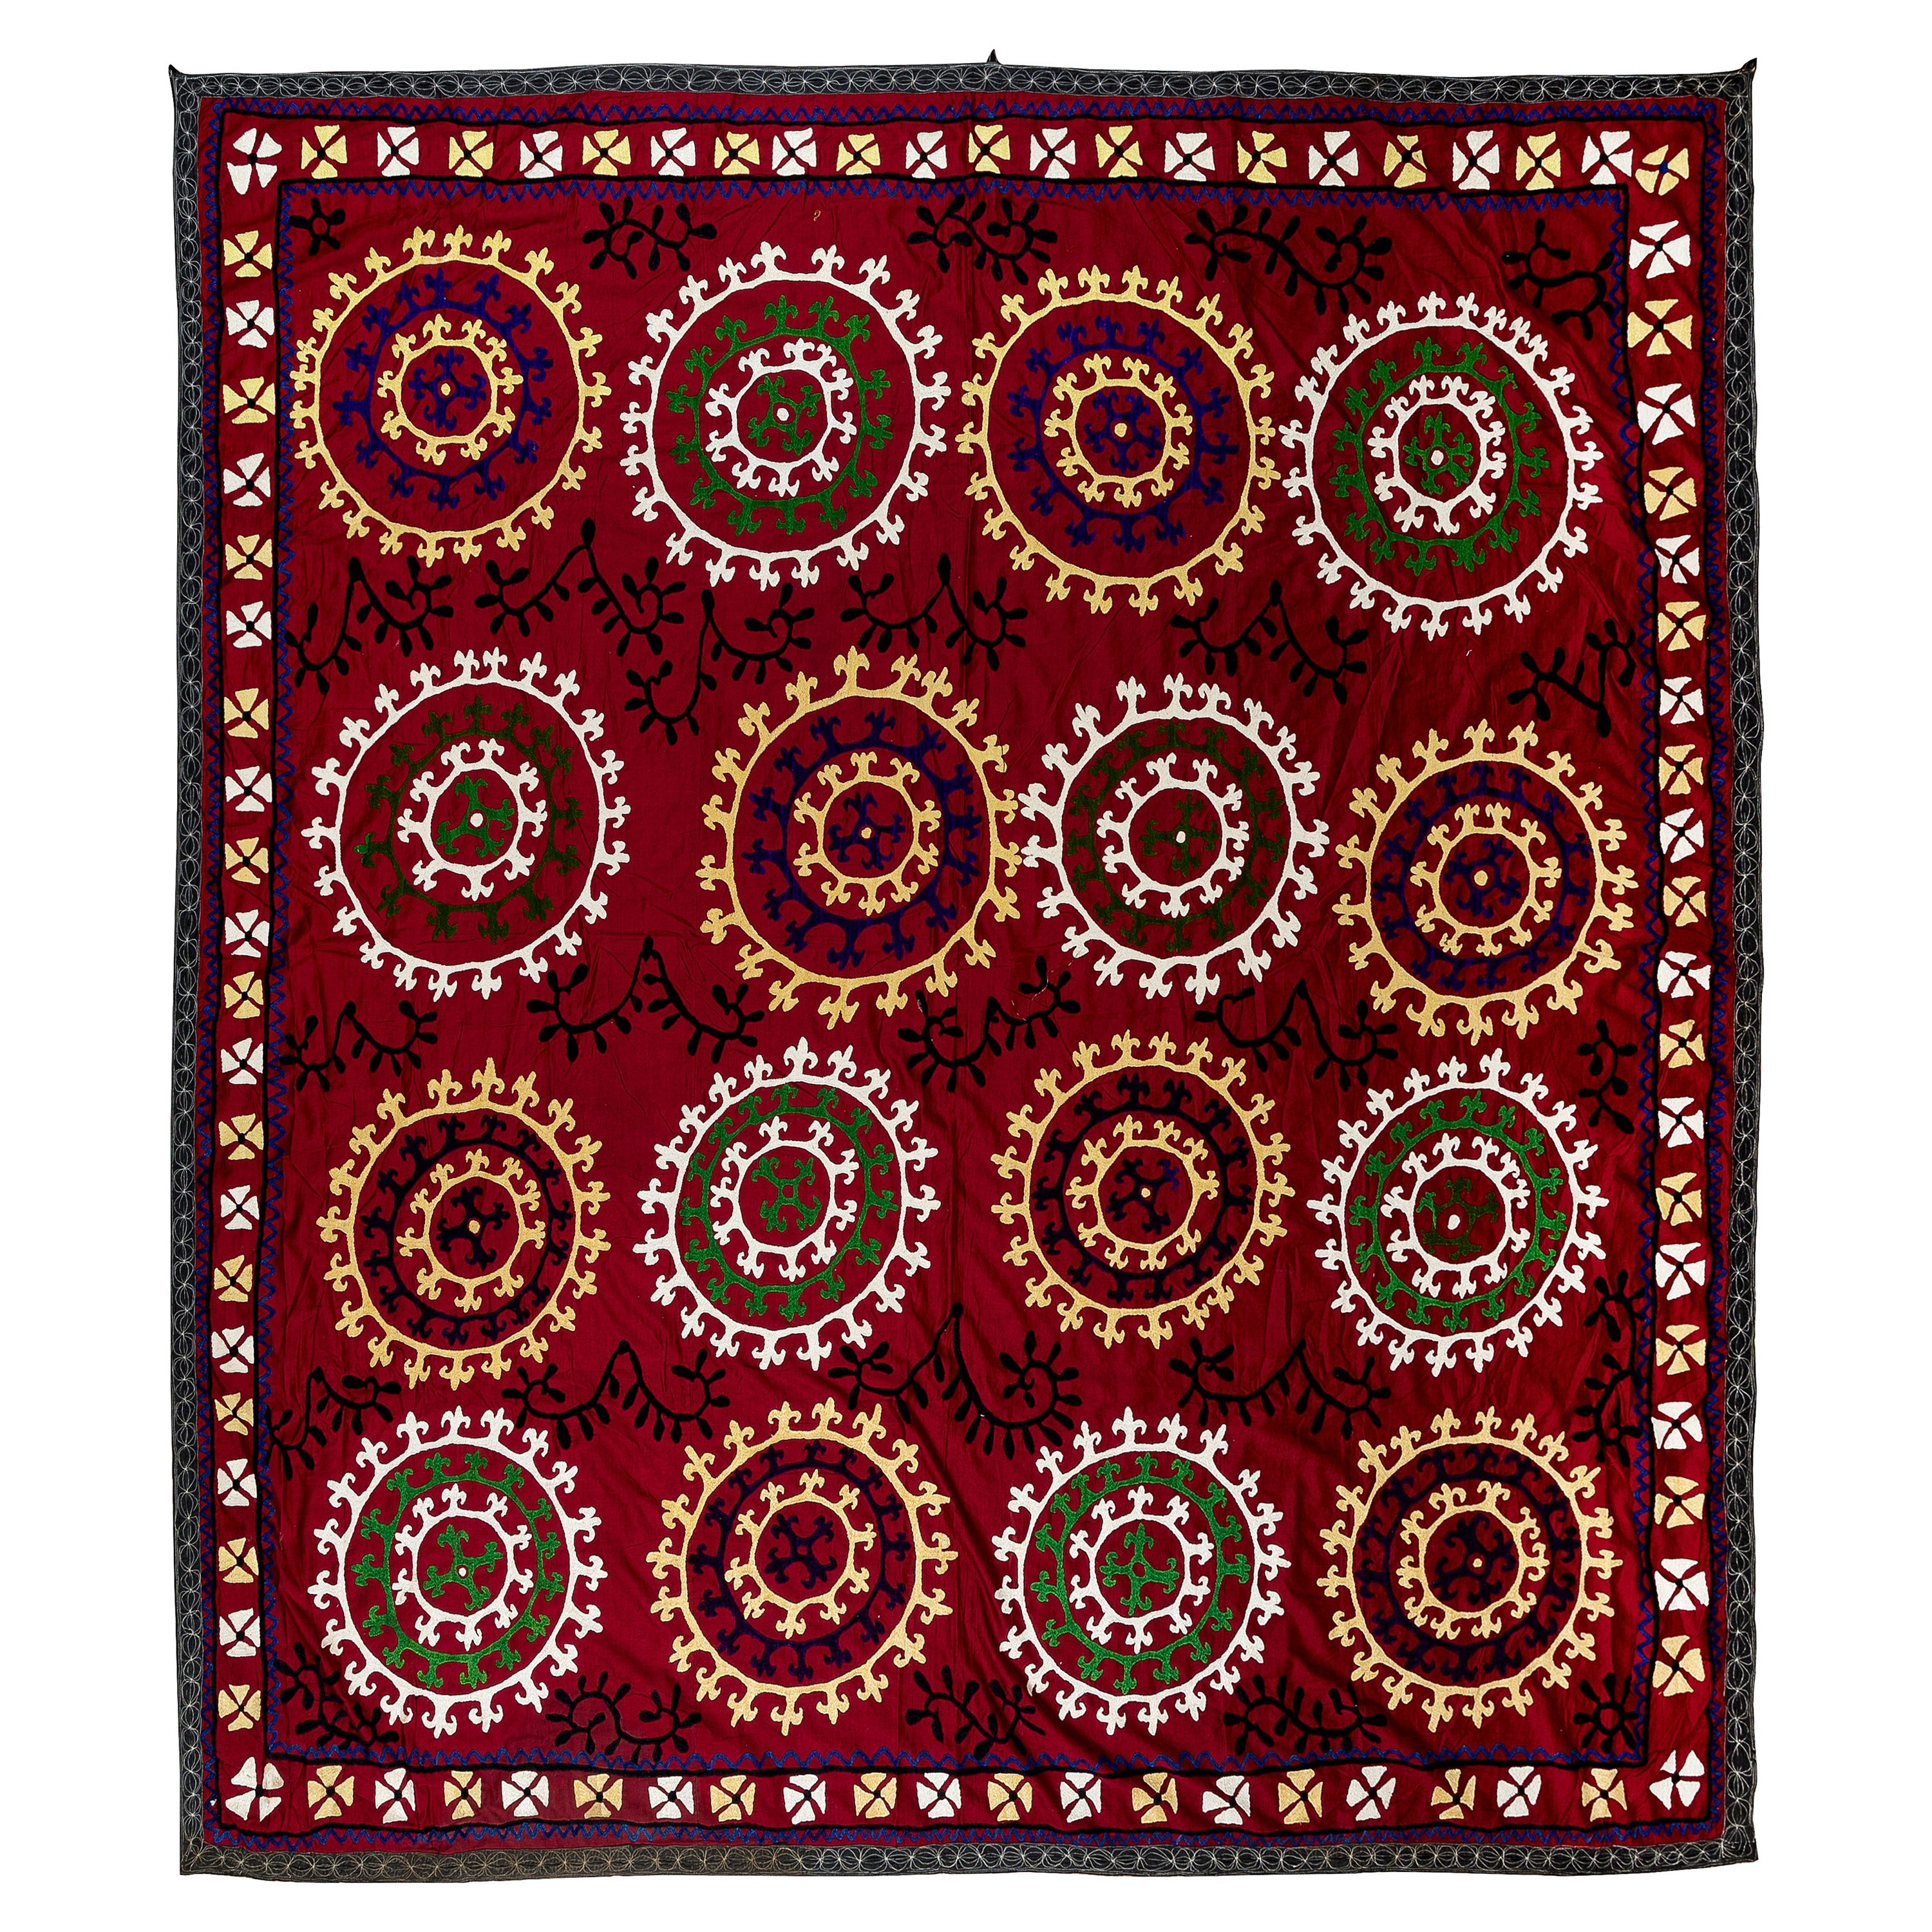 6.8x7.2 Ft Embroidered Bed Cover, Vintage Wall Hanging, Red Tapestry, Silk Throw